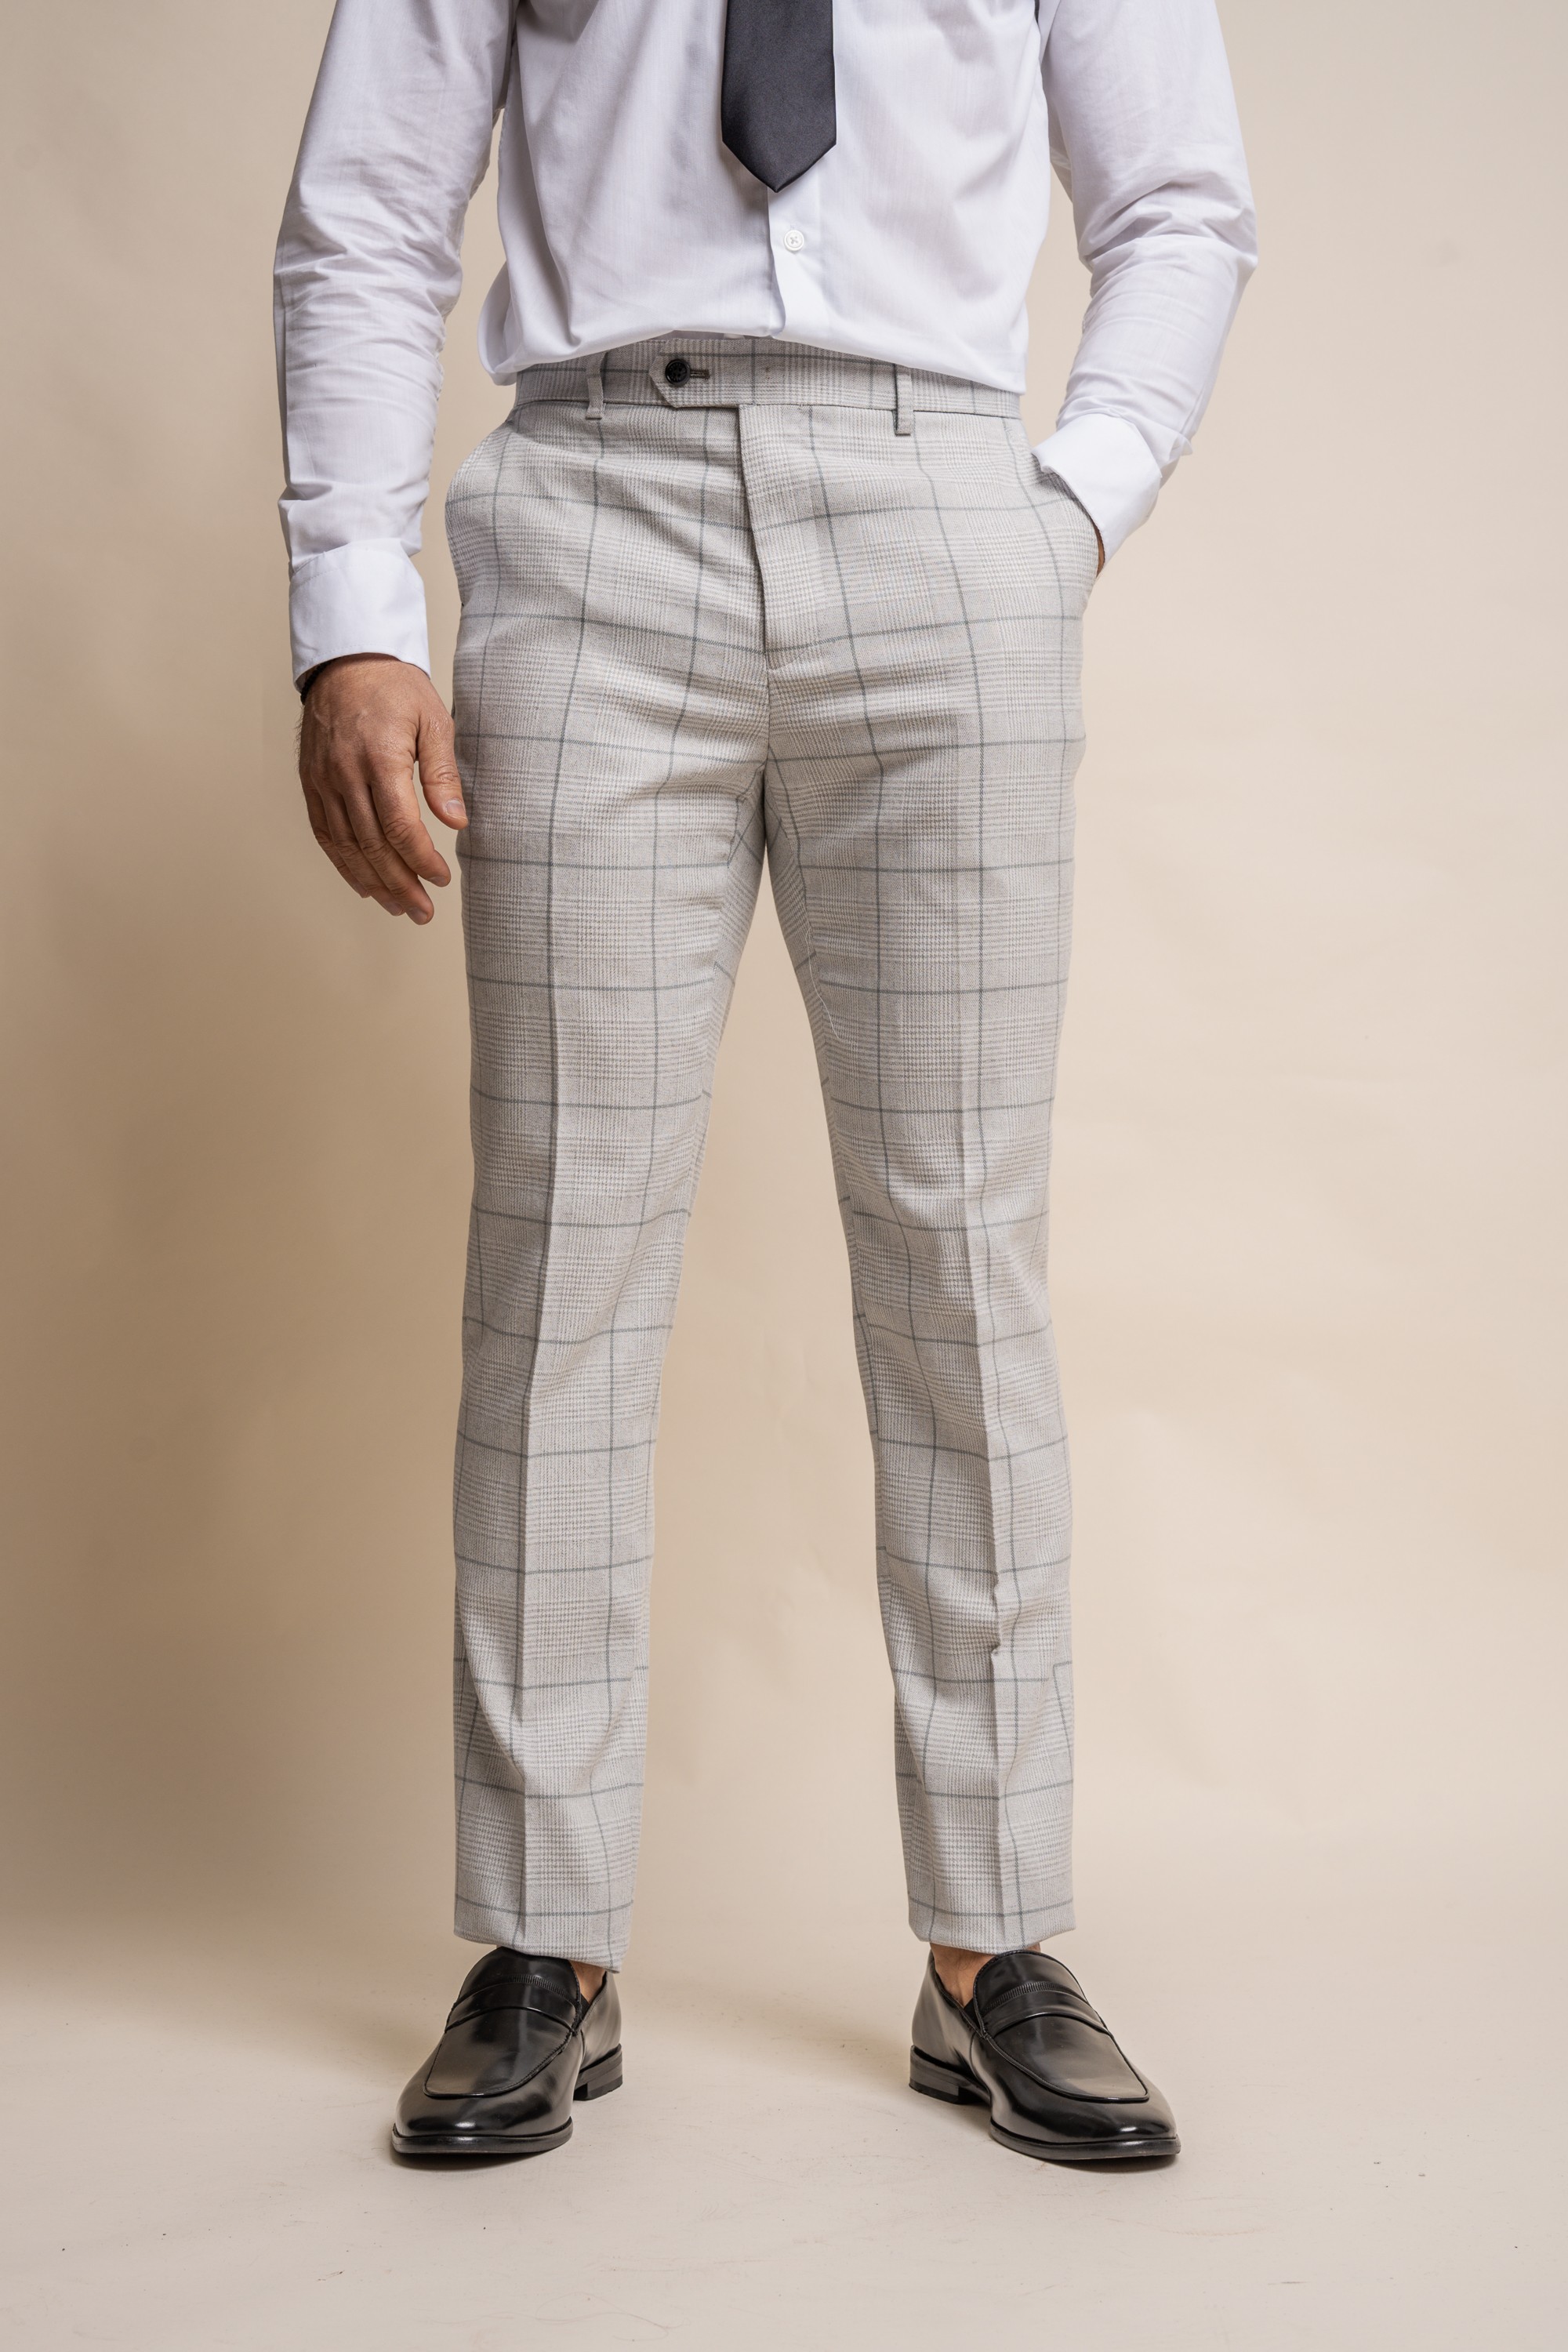 Limehaus | Grey Tonal Checked Skinny Fit Trousers | Suit Direct